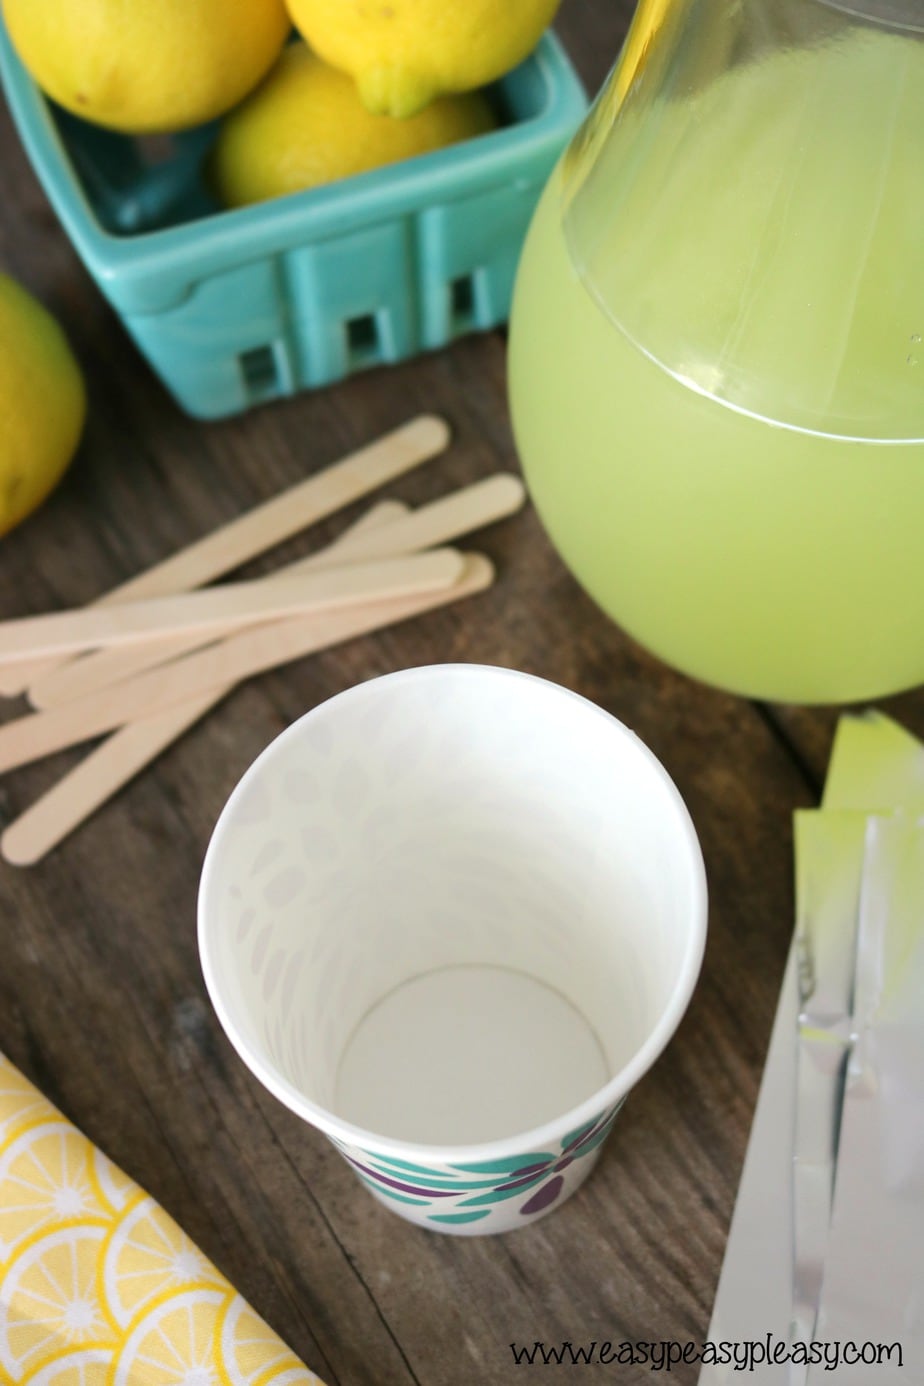 Follow these steps to make super easy and refreshingly delicious homemade lemonade Popsicle. Step 1 to homemade popsicles.